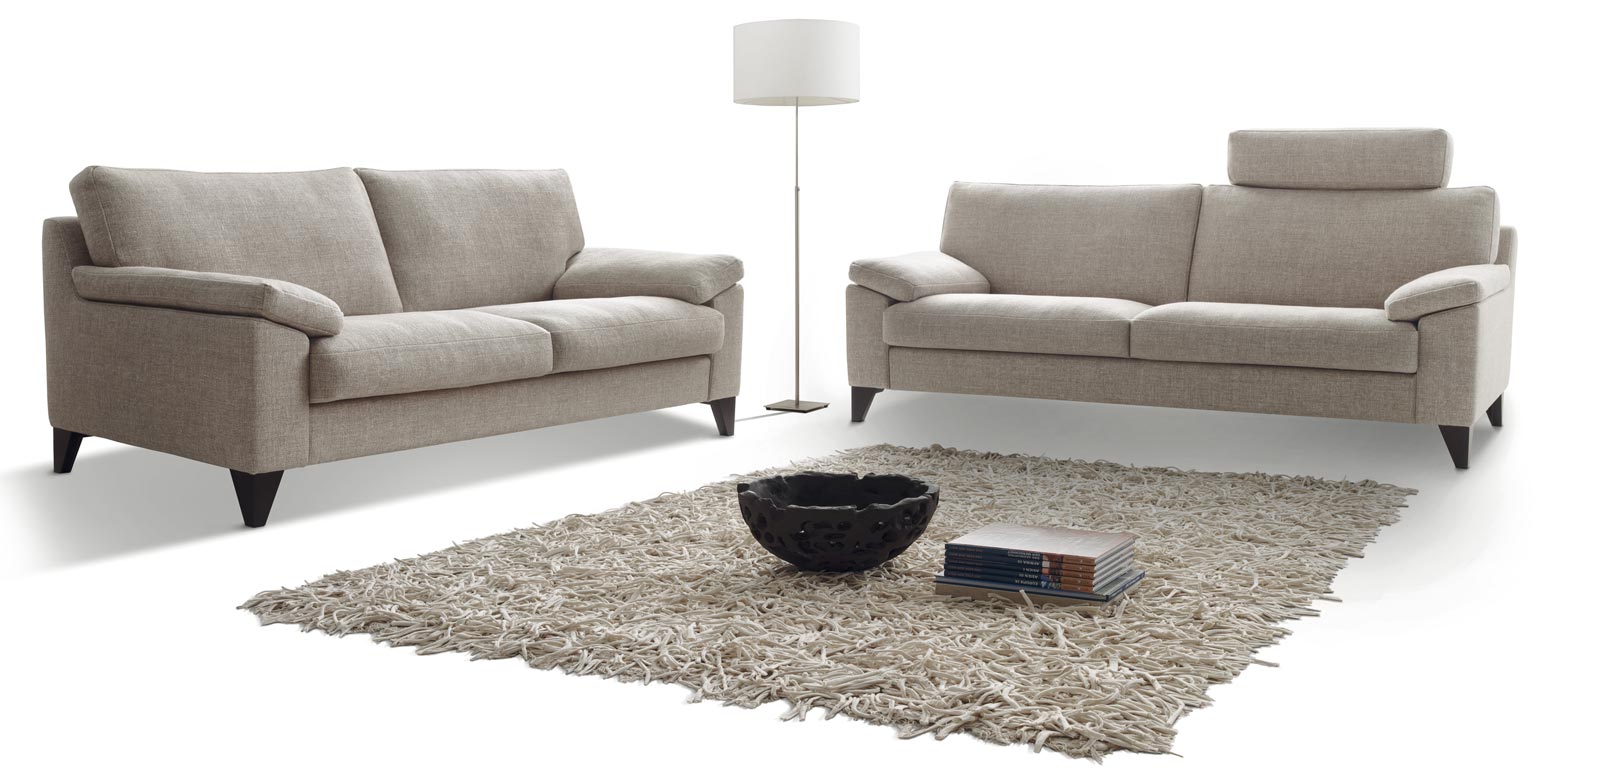 CL650 Sofas in beige and white fabric with headrest